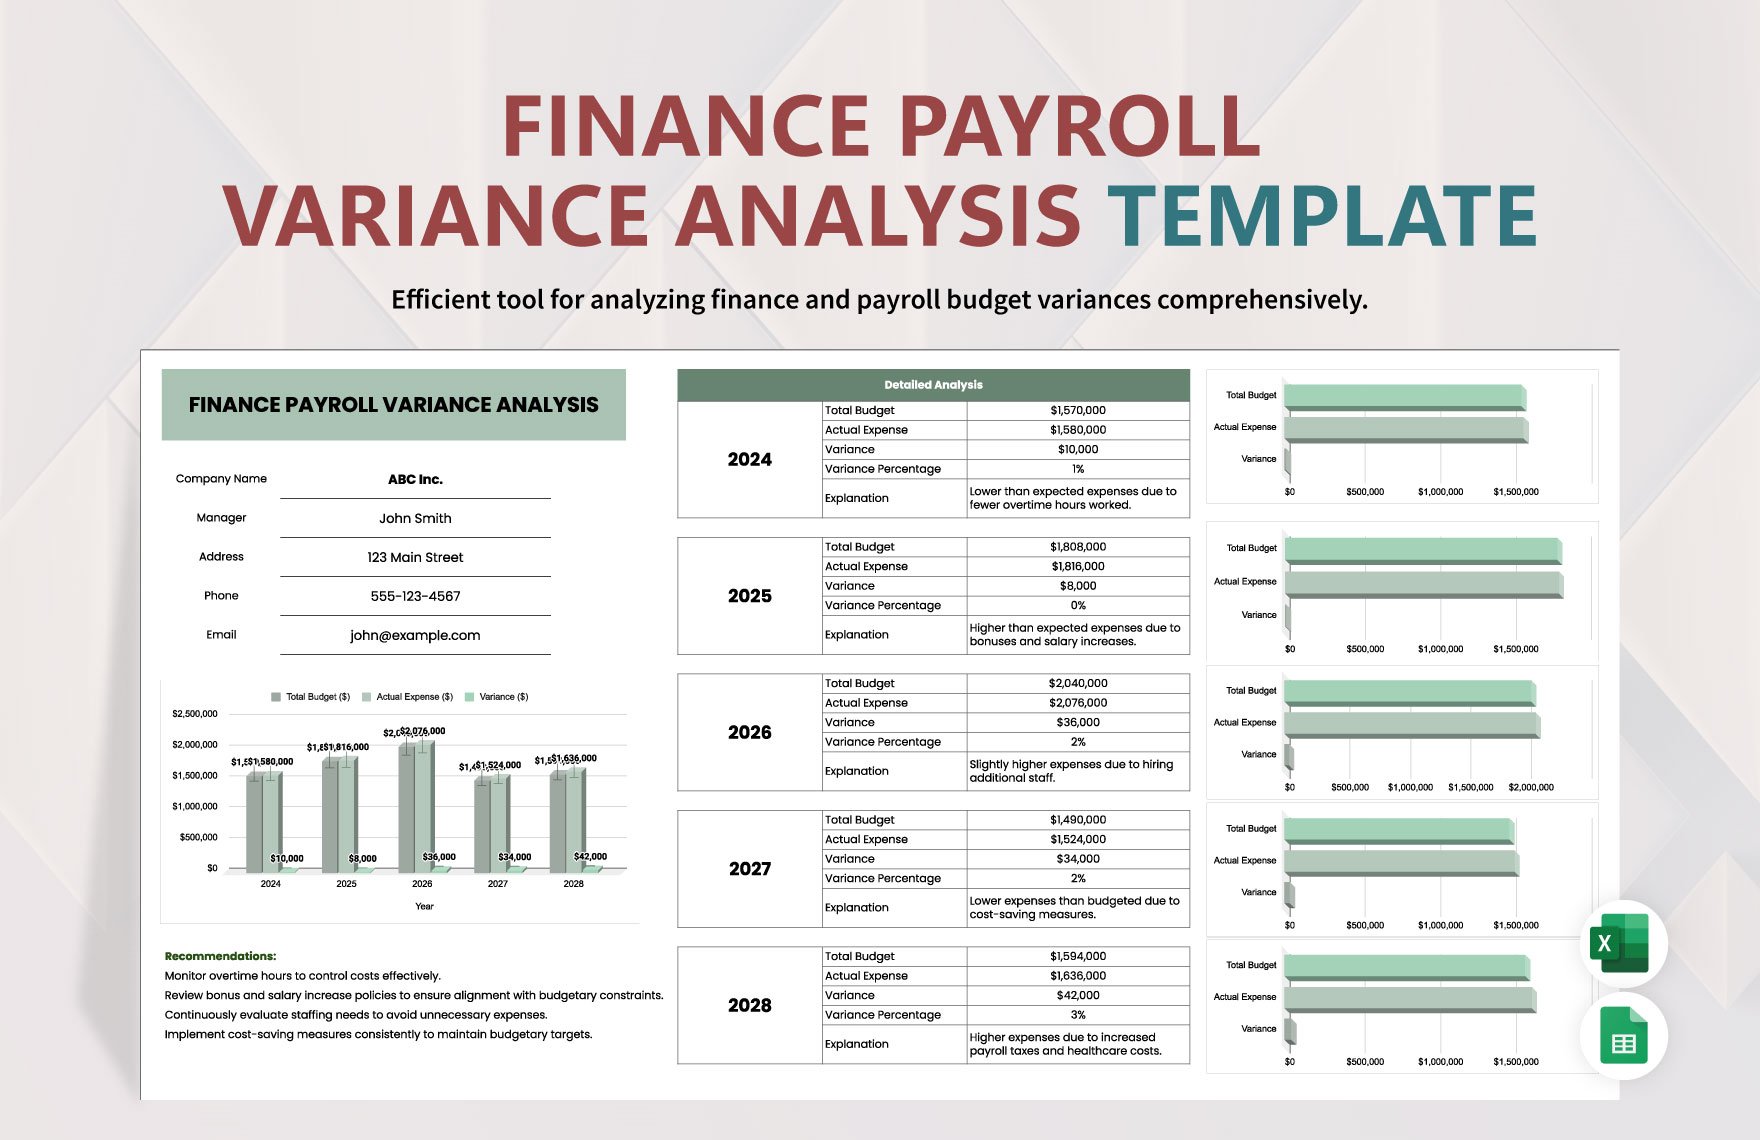 Finance Payroll Variance Analysis Template in Excel, Google Sheets